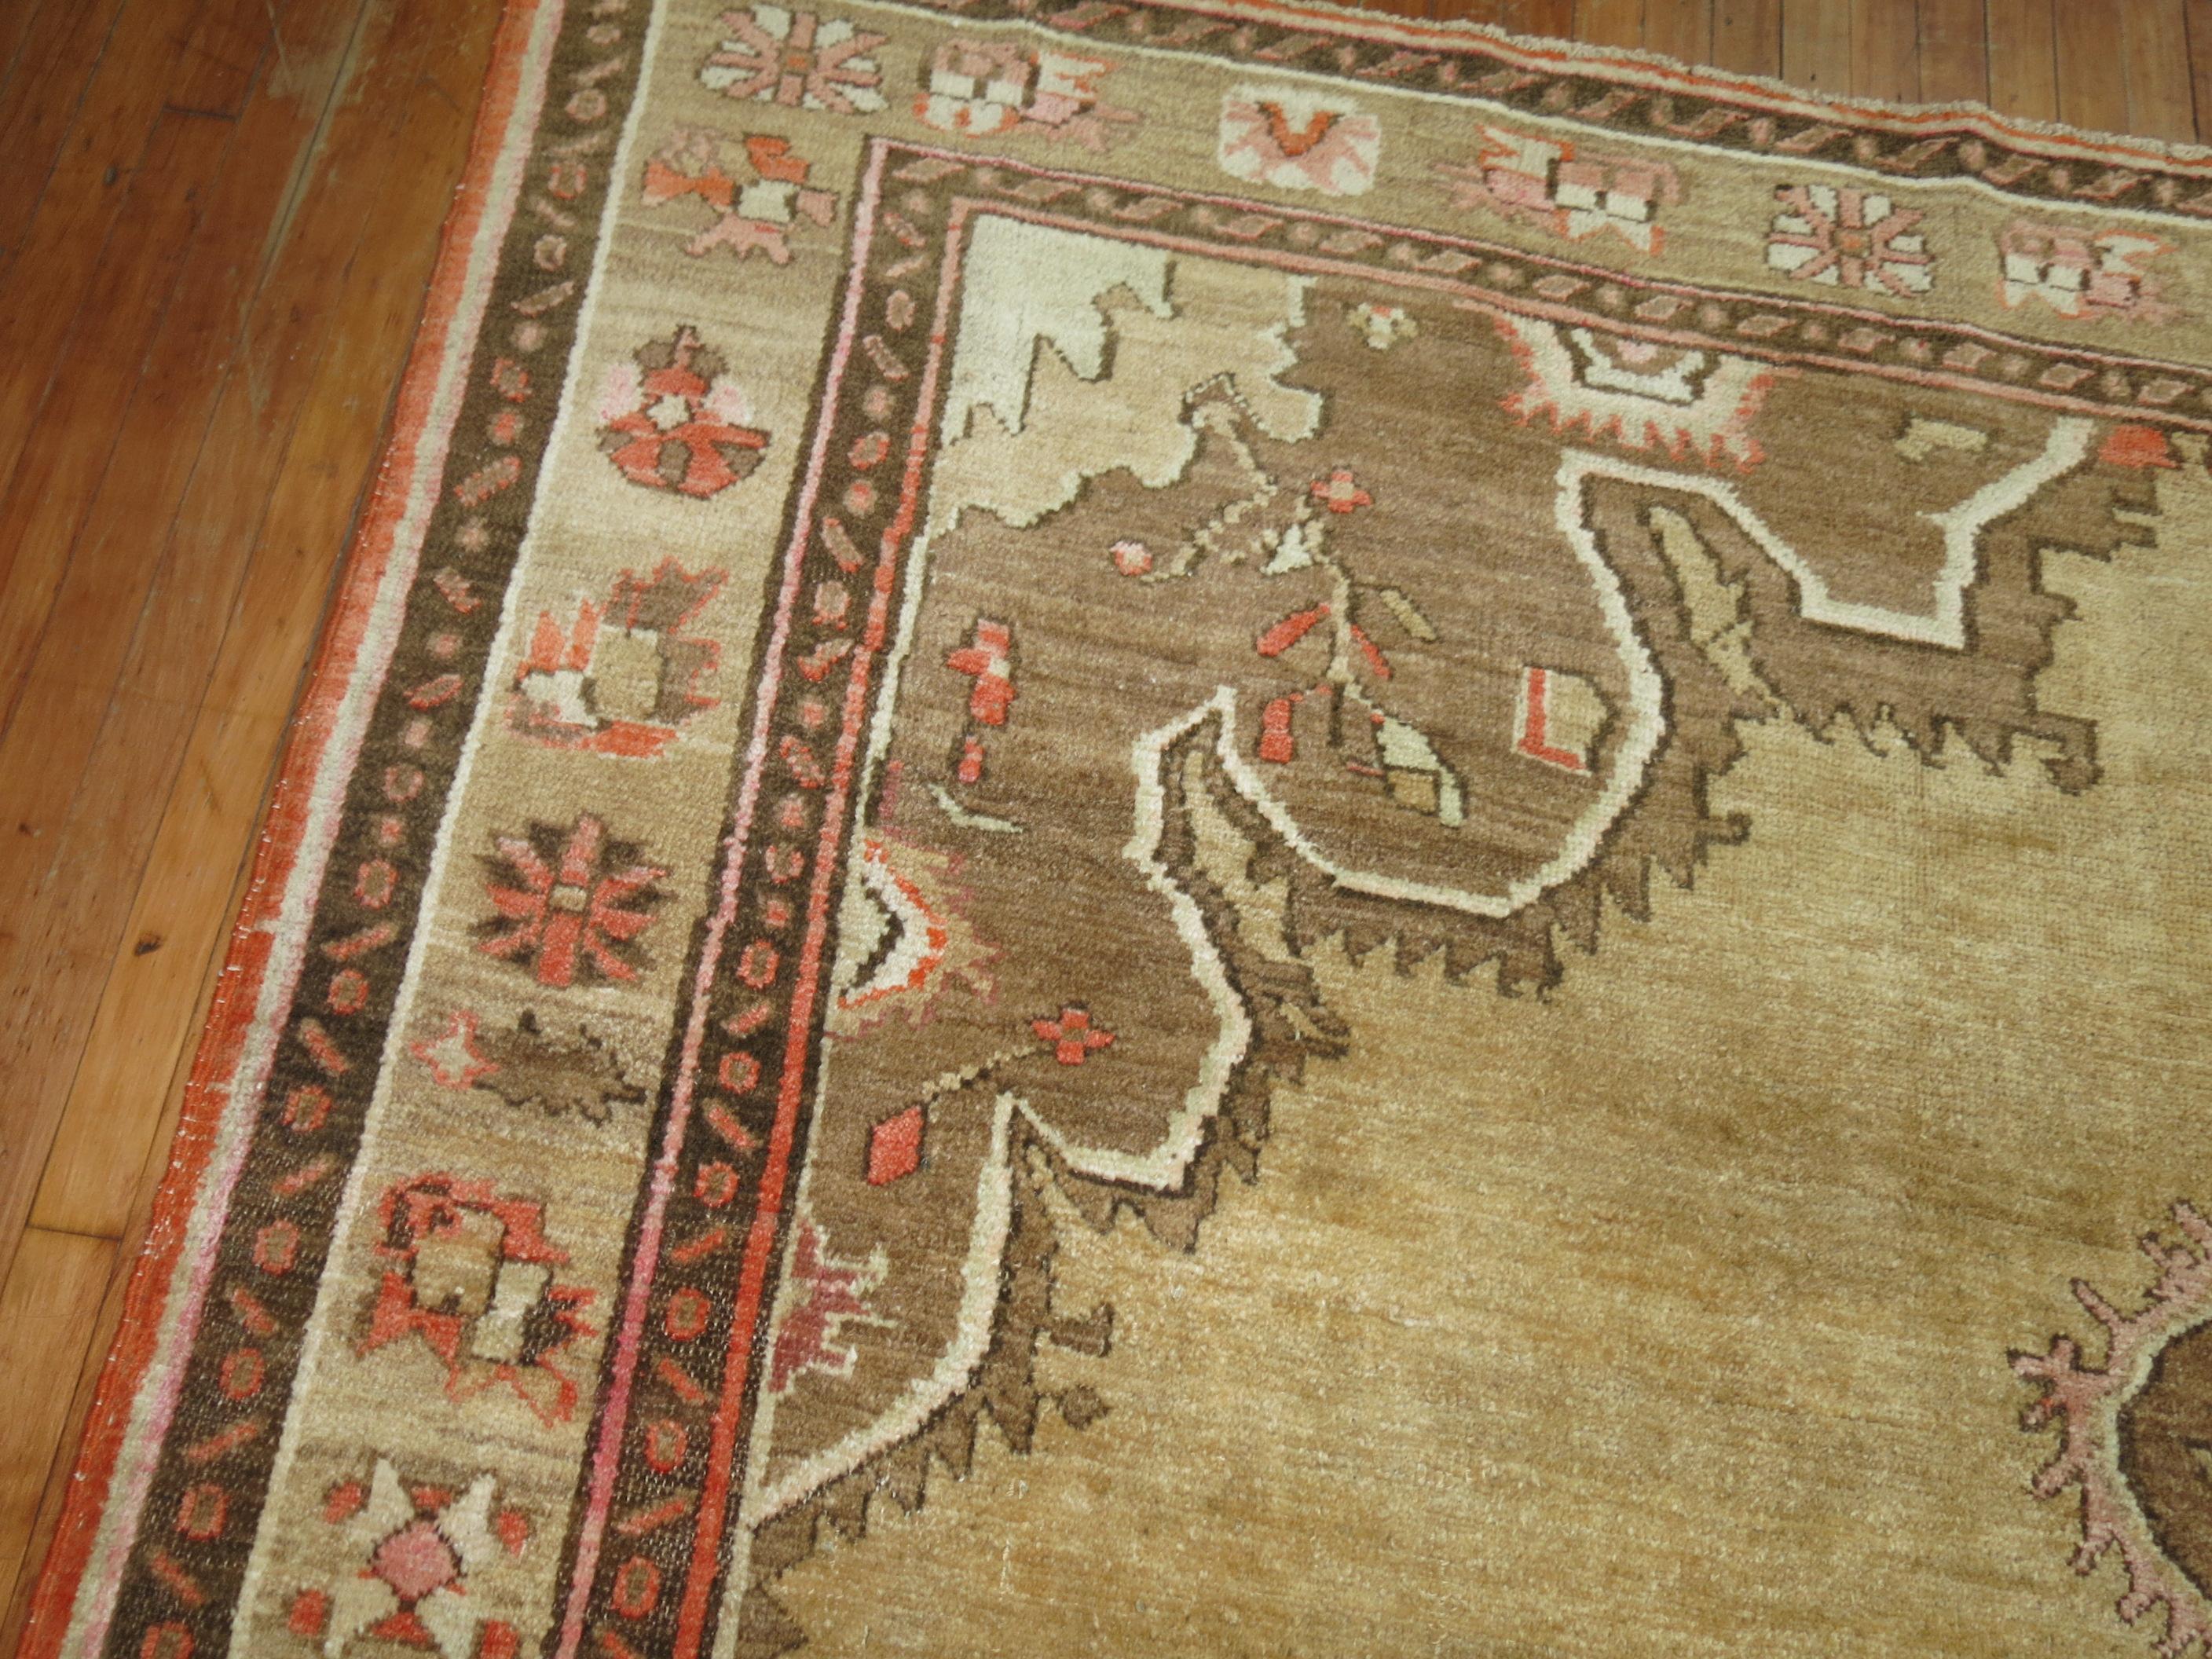 Room size Turkish Kars rug with a traditional medallion and border design on a beige ground dated 1986

Measures: 8'2